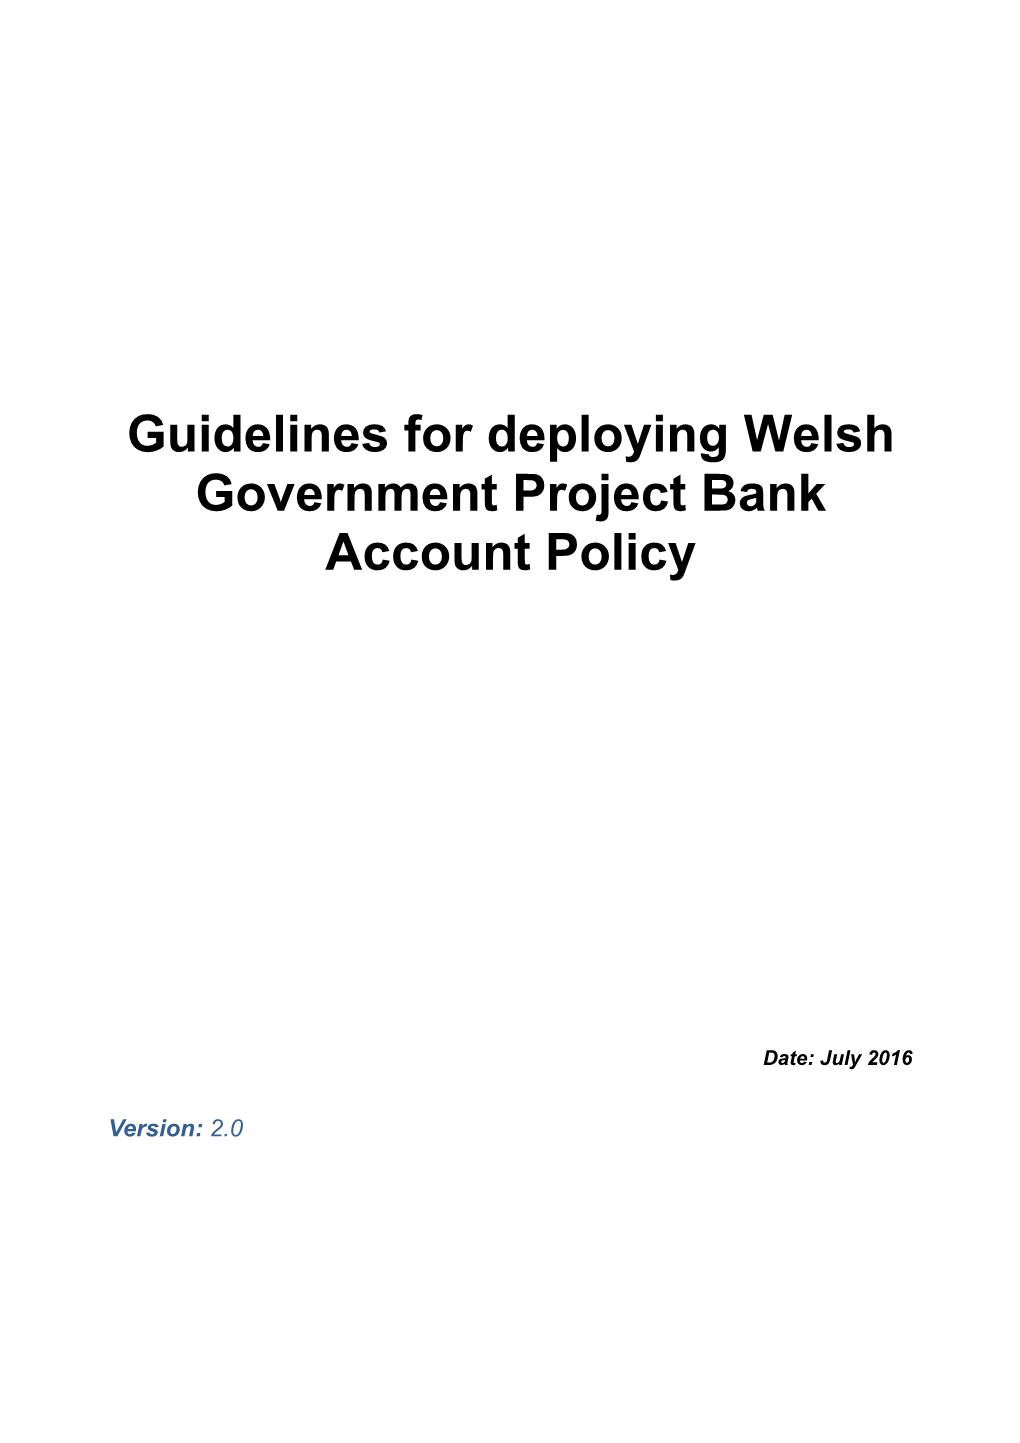 Project Bank Account Implementation Guidance